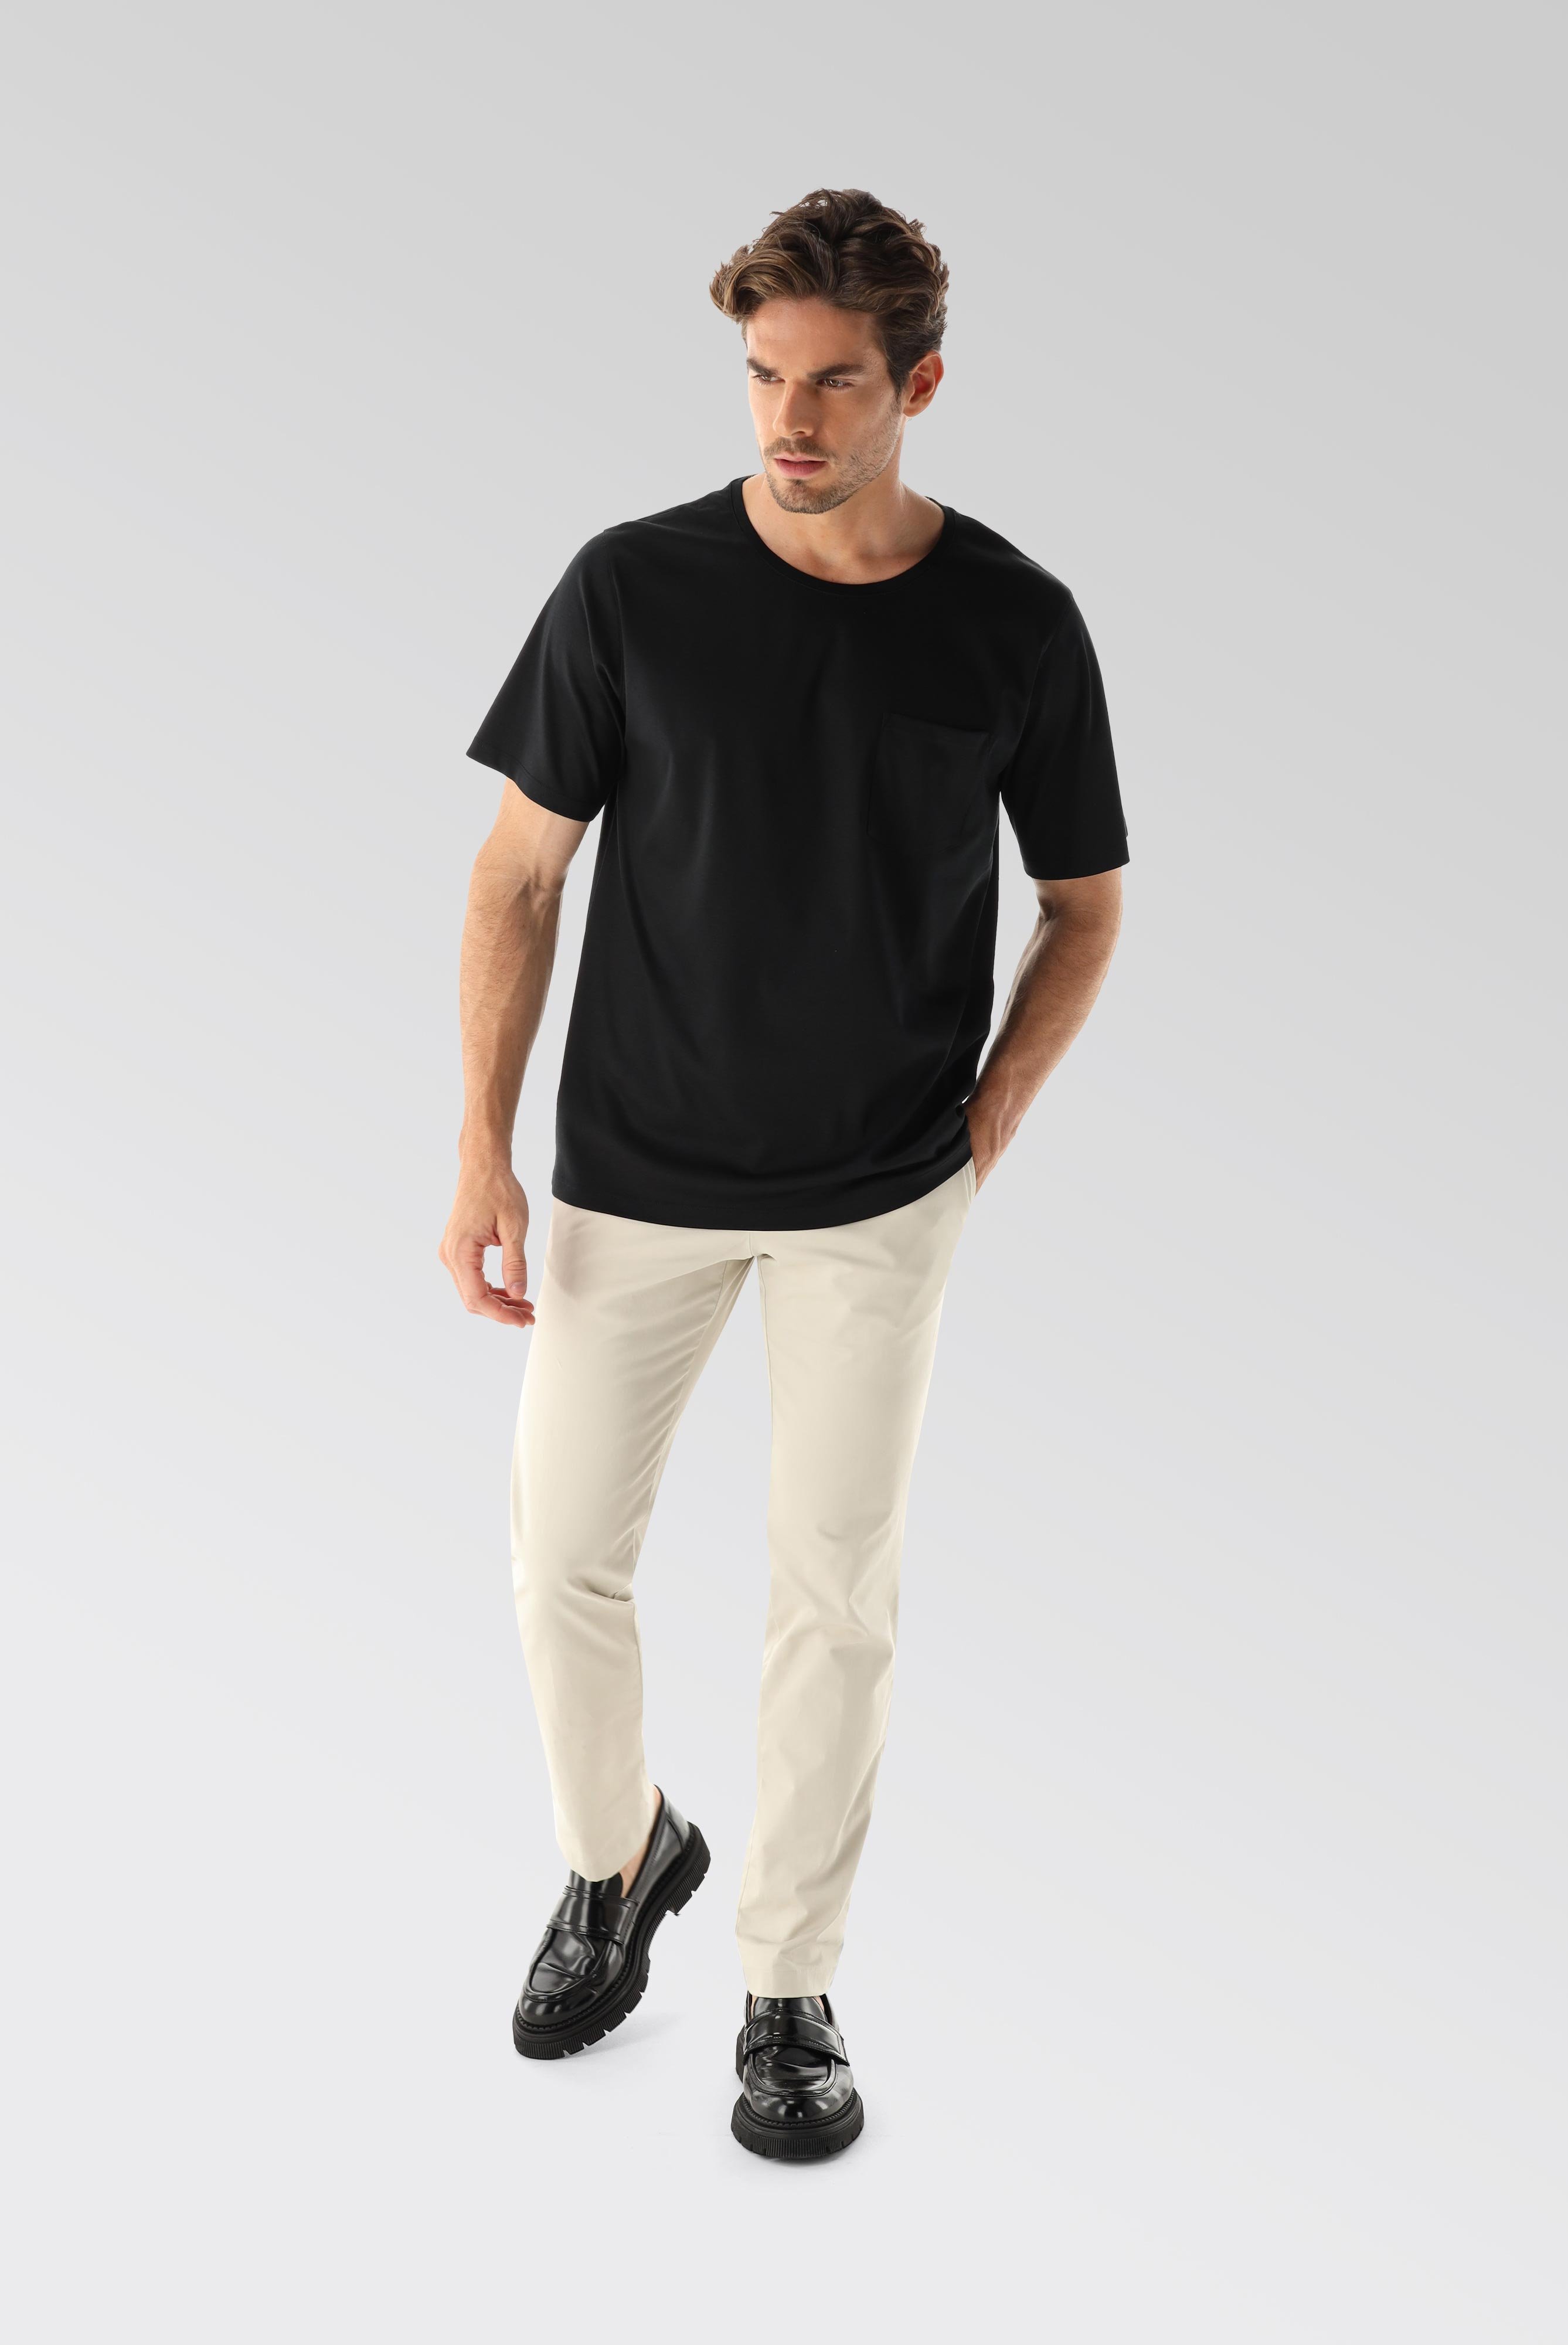 T-Shirts+Oversize Jersey T-Shirt with a Chest Pocket+20.1776.GZ.180031.099.S